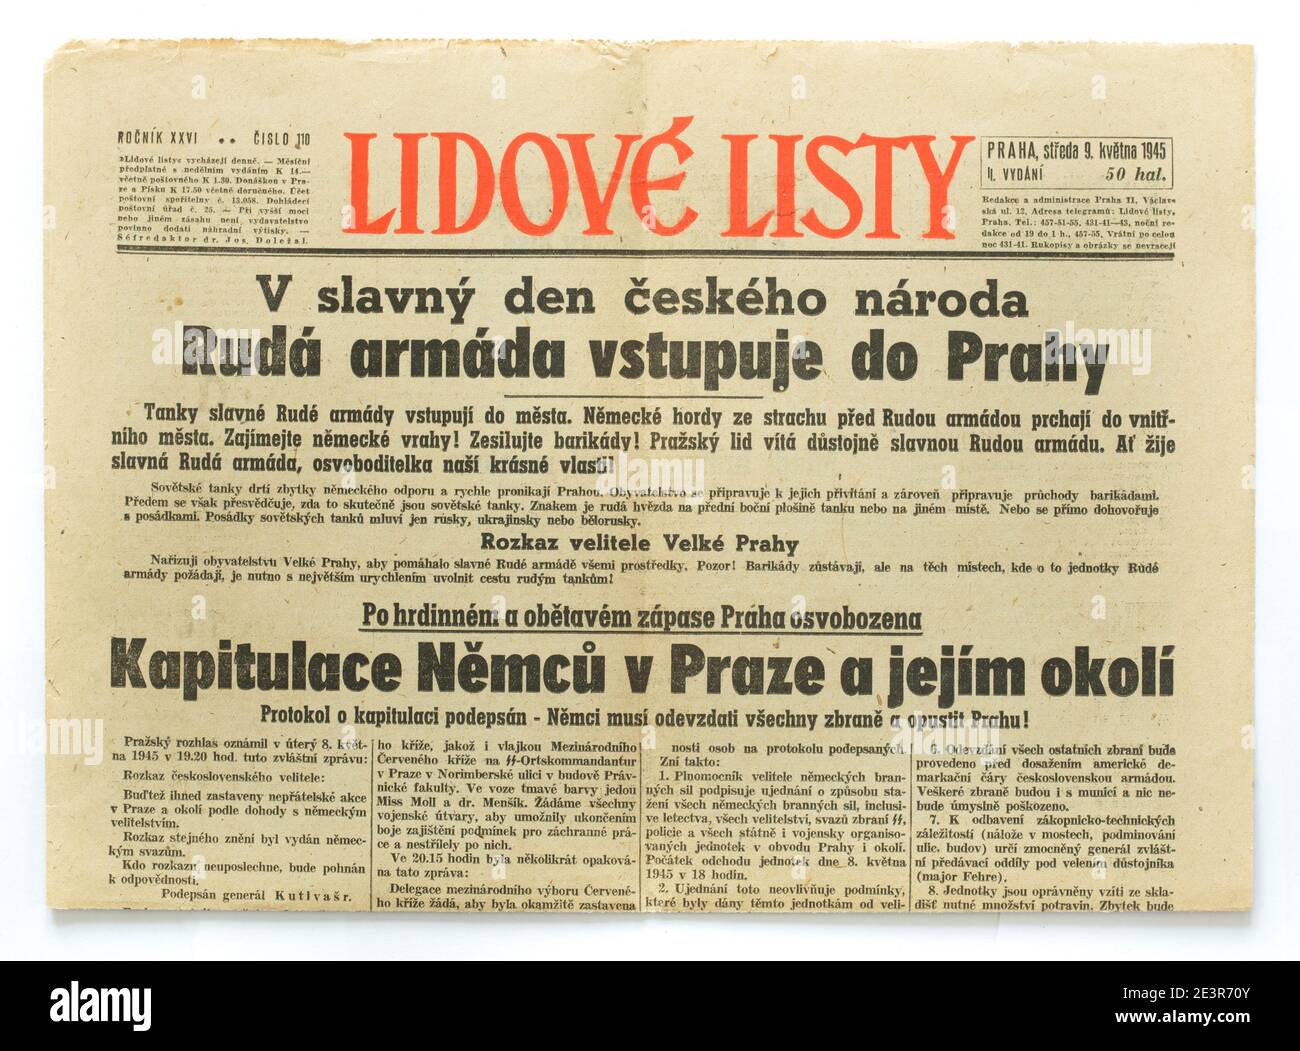 Czechoslovak newspaper 'Lidové listy' ('People Papers') issued on 9th May 1945 with announcements of the surrender of the Nazi German forces in Prague and surroundings and of the entry of the Red Army into Prague. The first line in Czech language means: In the glorious day of the Czech nation, the Red Army is entering in Prague. The second line means: Prague is liberated after the heroic and sacrificial struggle. The surrender of the Germans in Prague and surroundings. The protocol of surrender is signed. The Germans have to lay the weapons down and leave Prague! The full text of the protocol Stock Photo